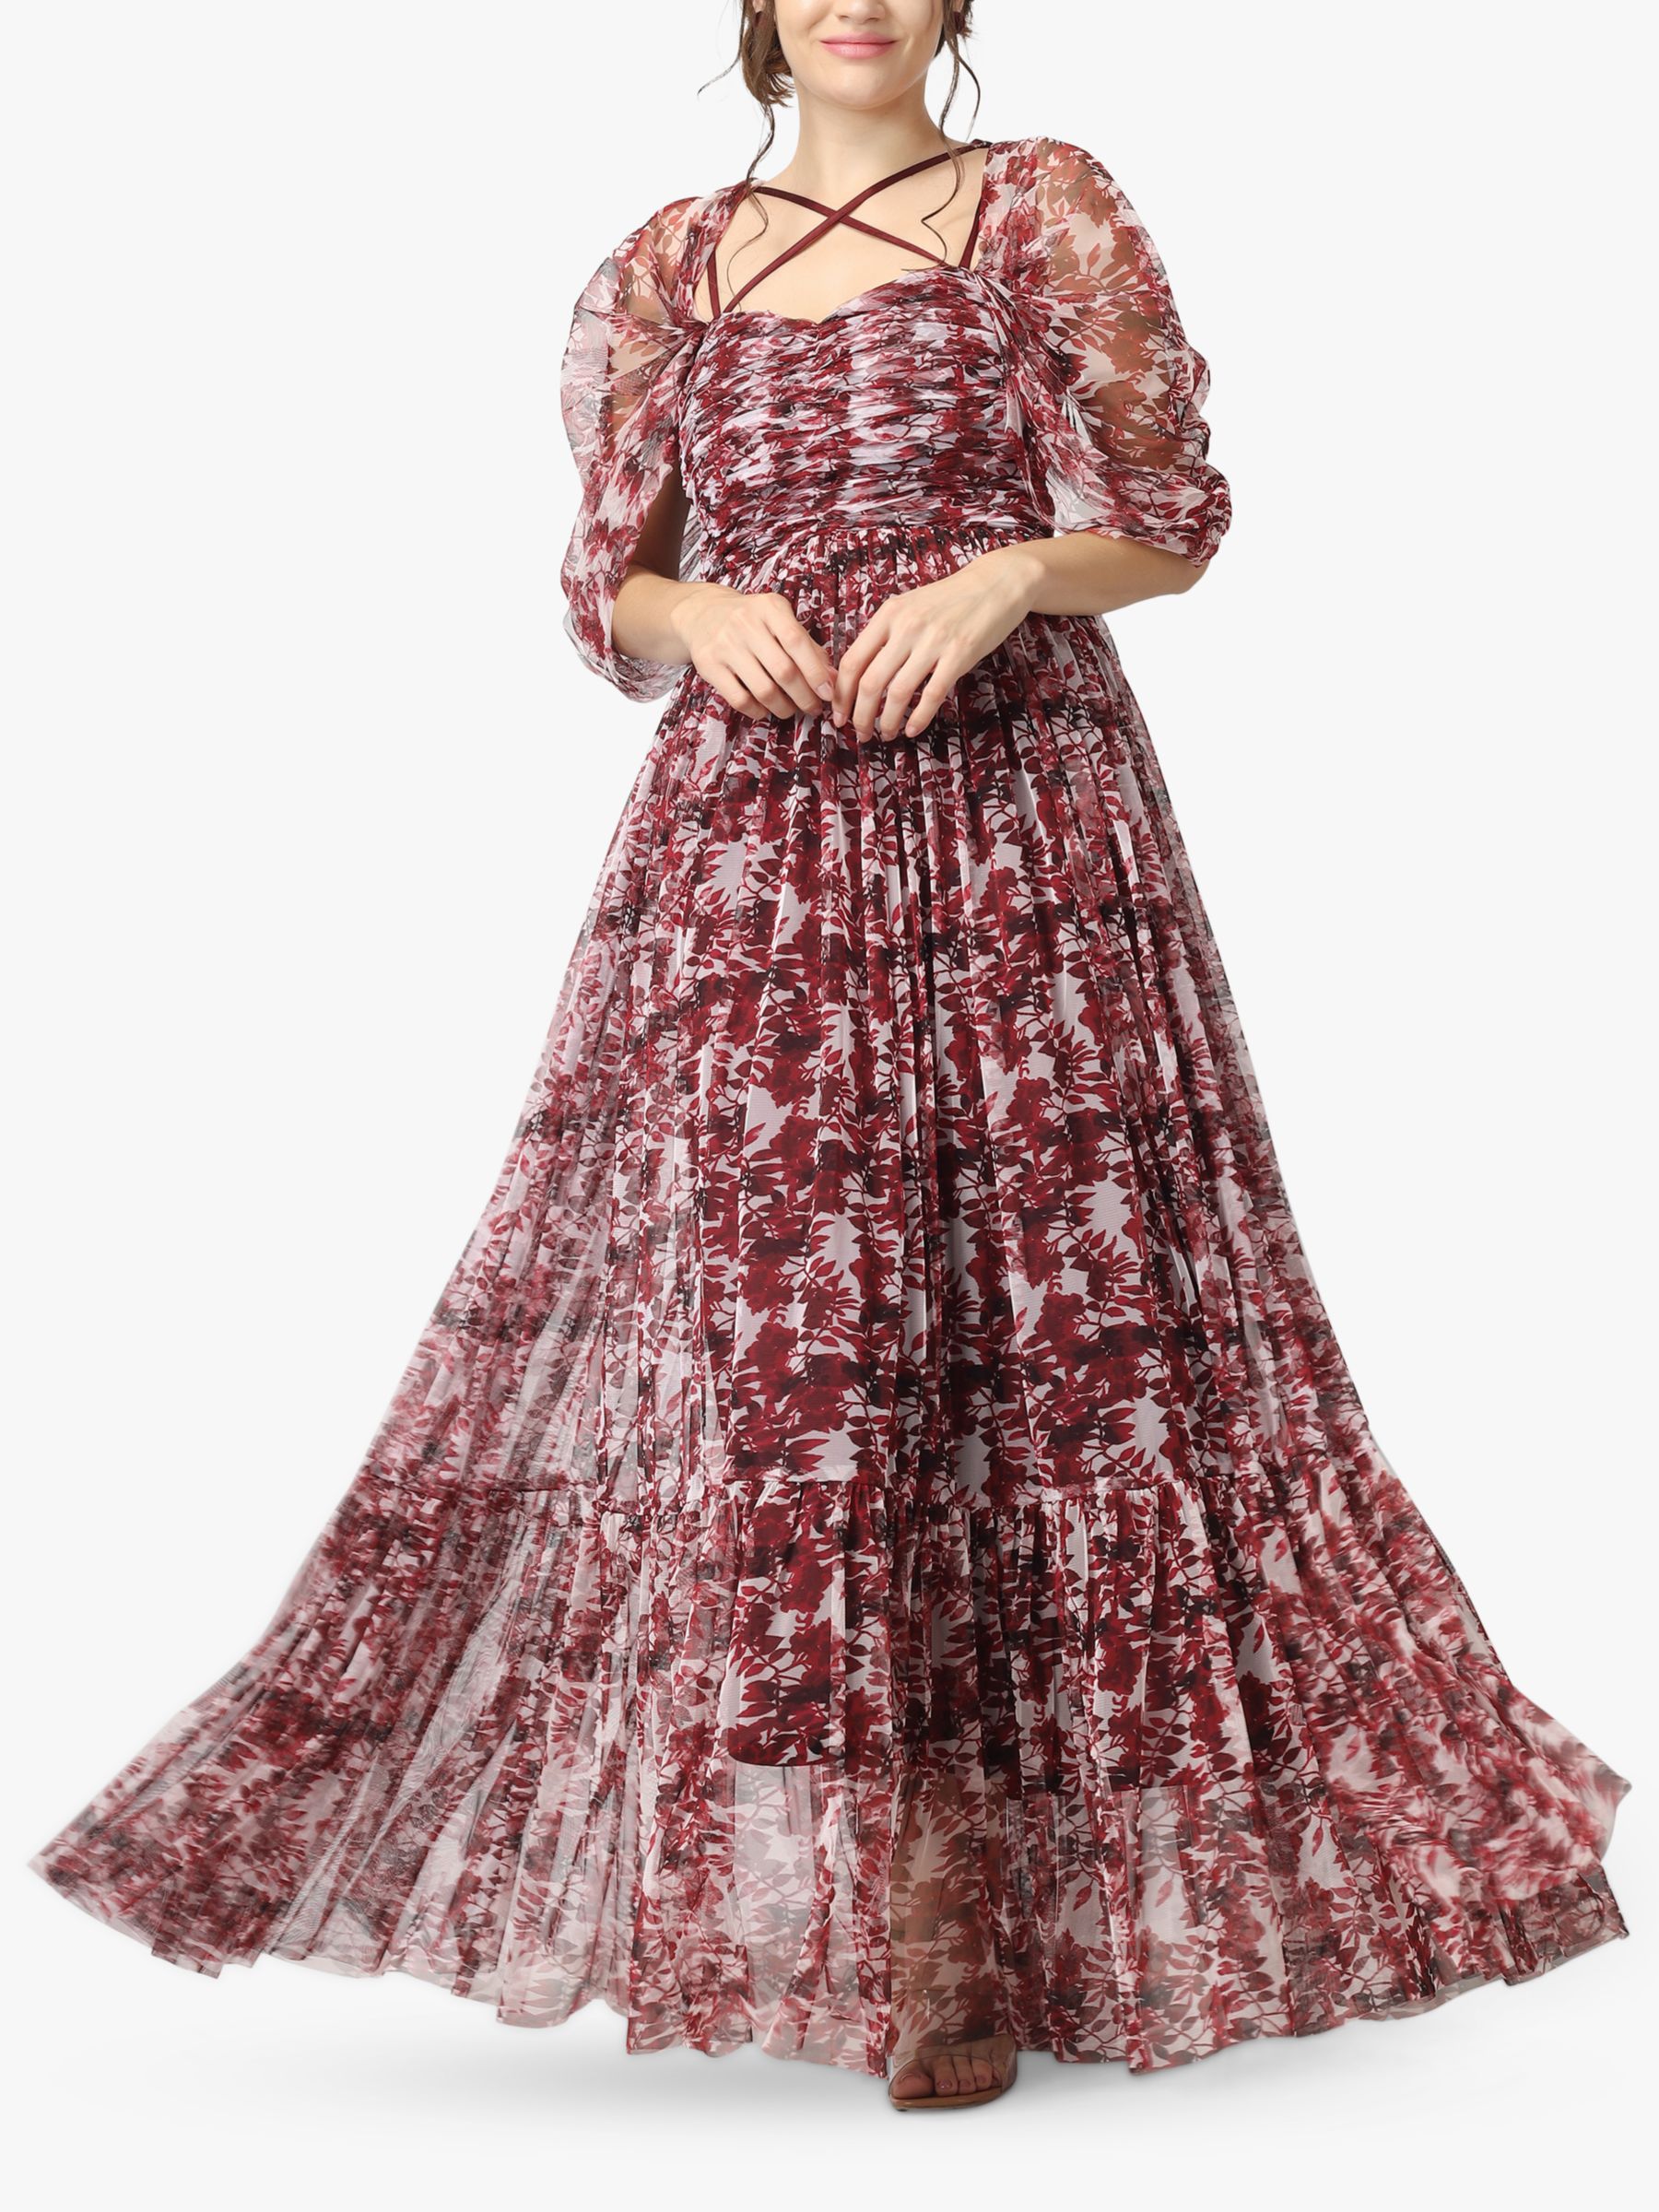 Buy Lace & Beads Alicia Cap Sleeve Maxi Dress, Burgundy Online at johnlewis.com